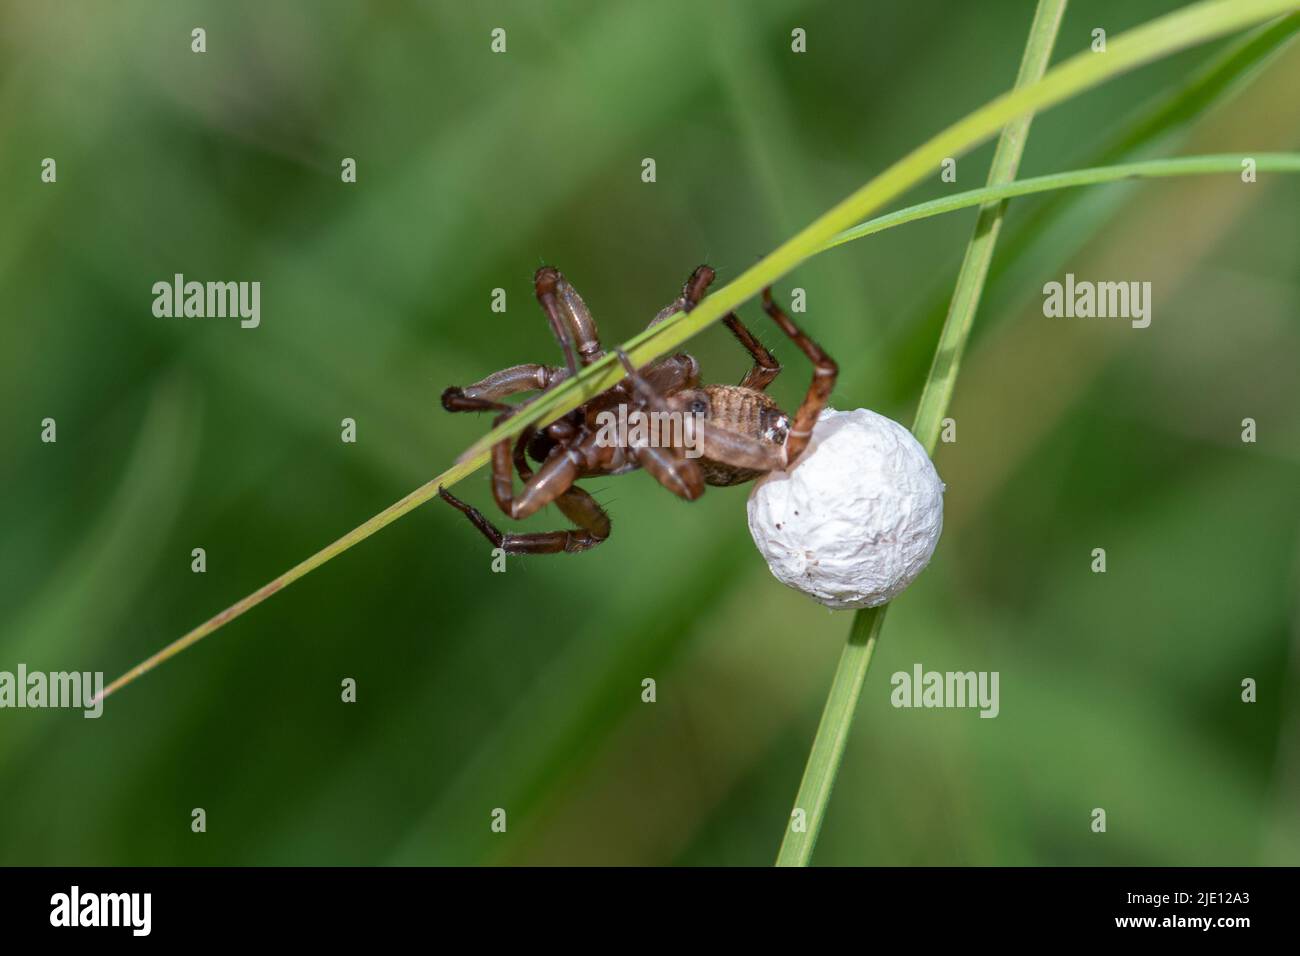 Female spider carrying her egg sac on grass, UK, during June or summer Stock Photo